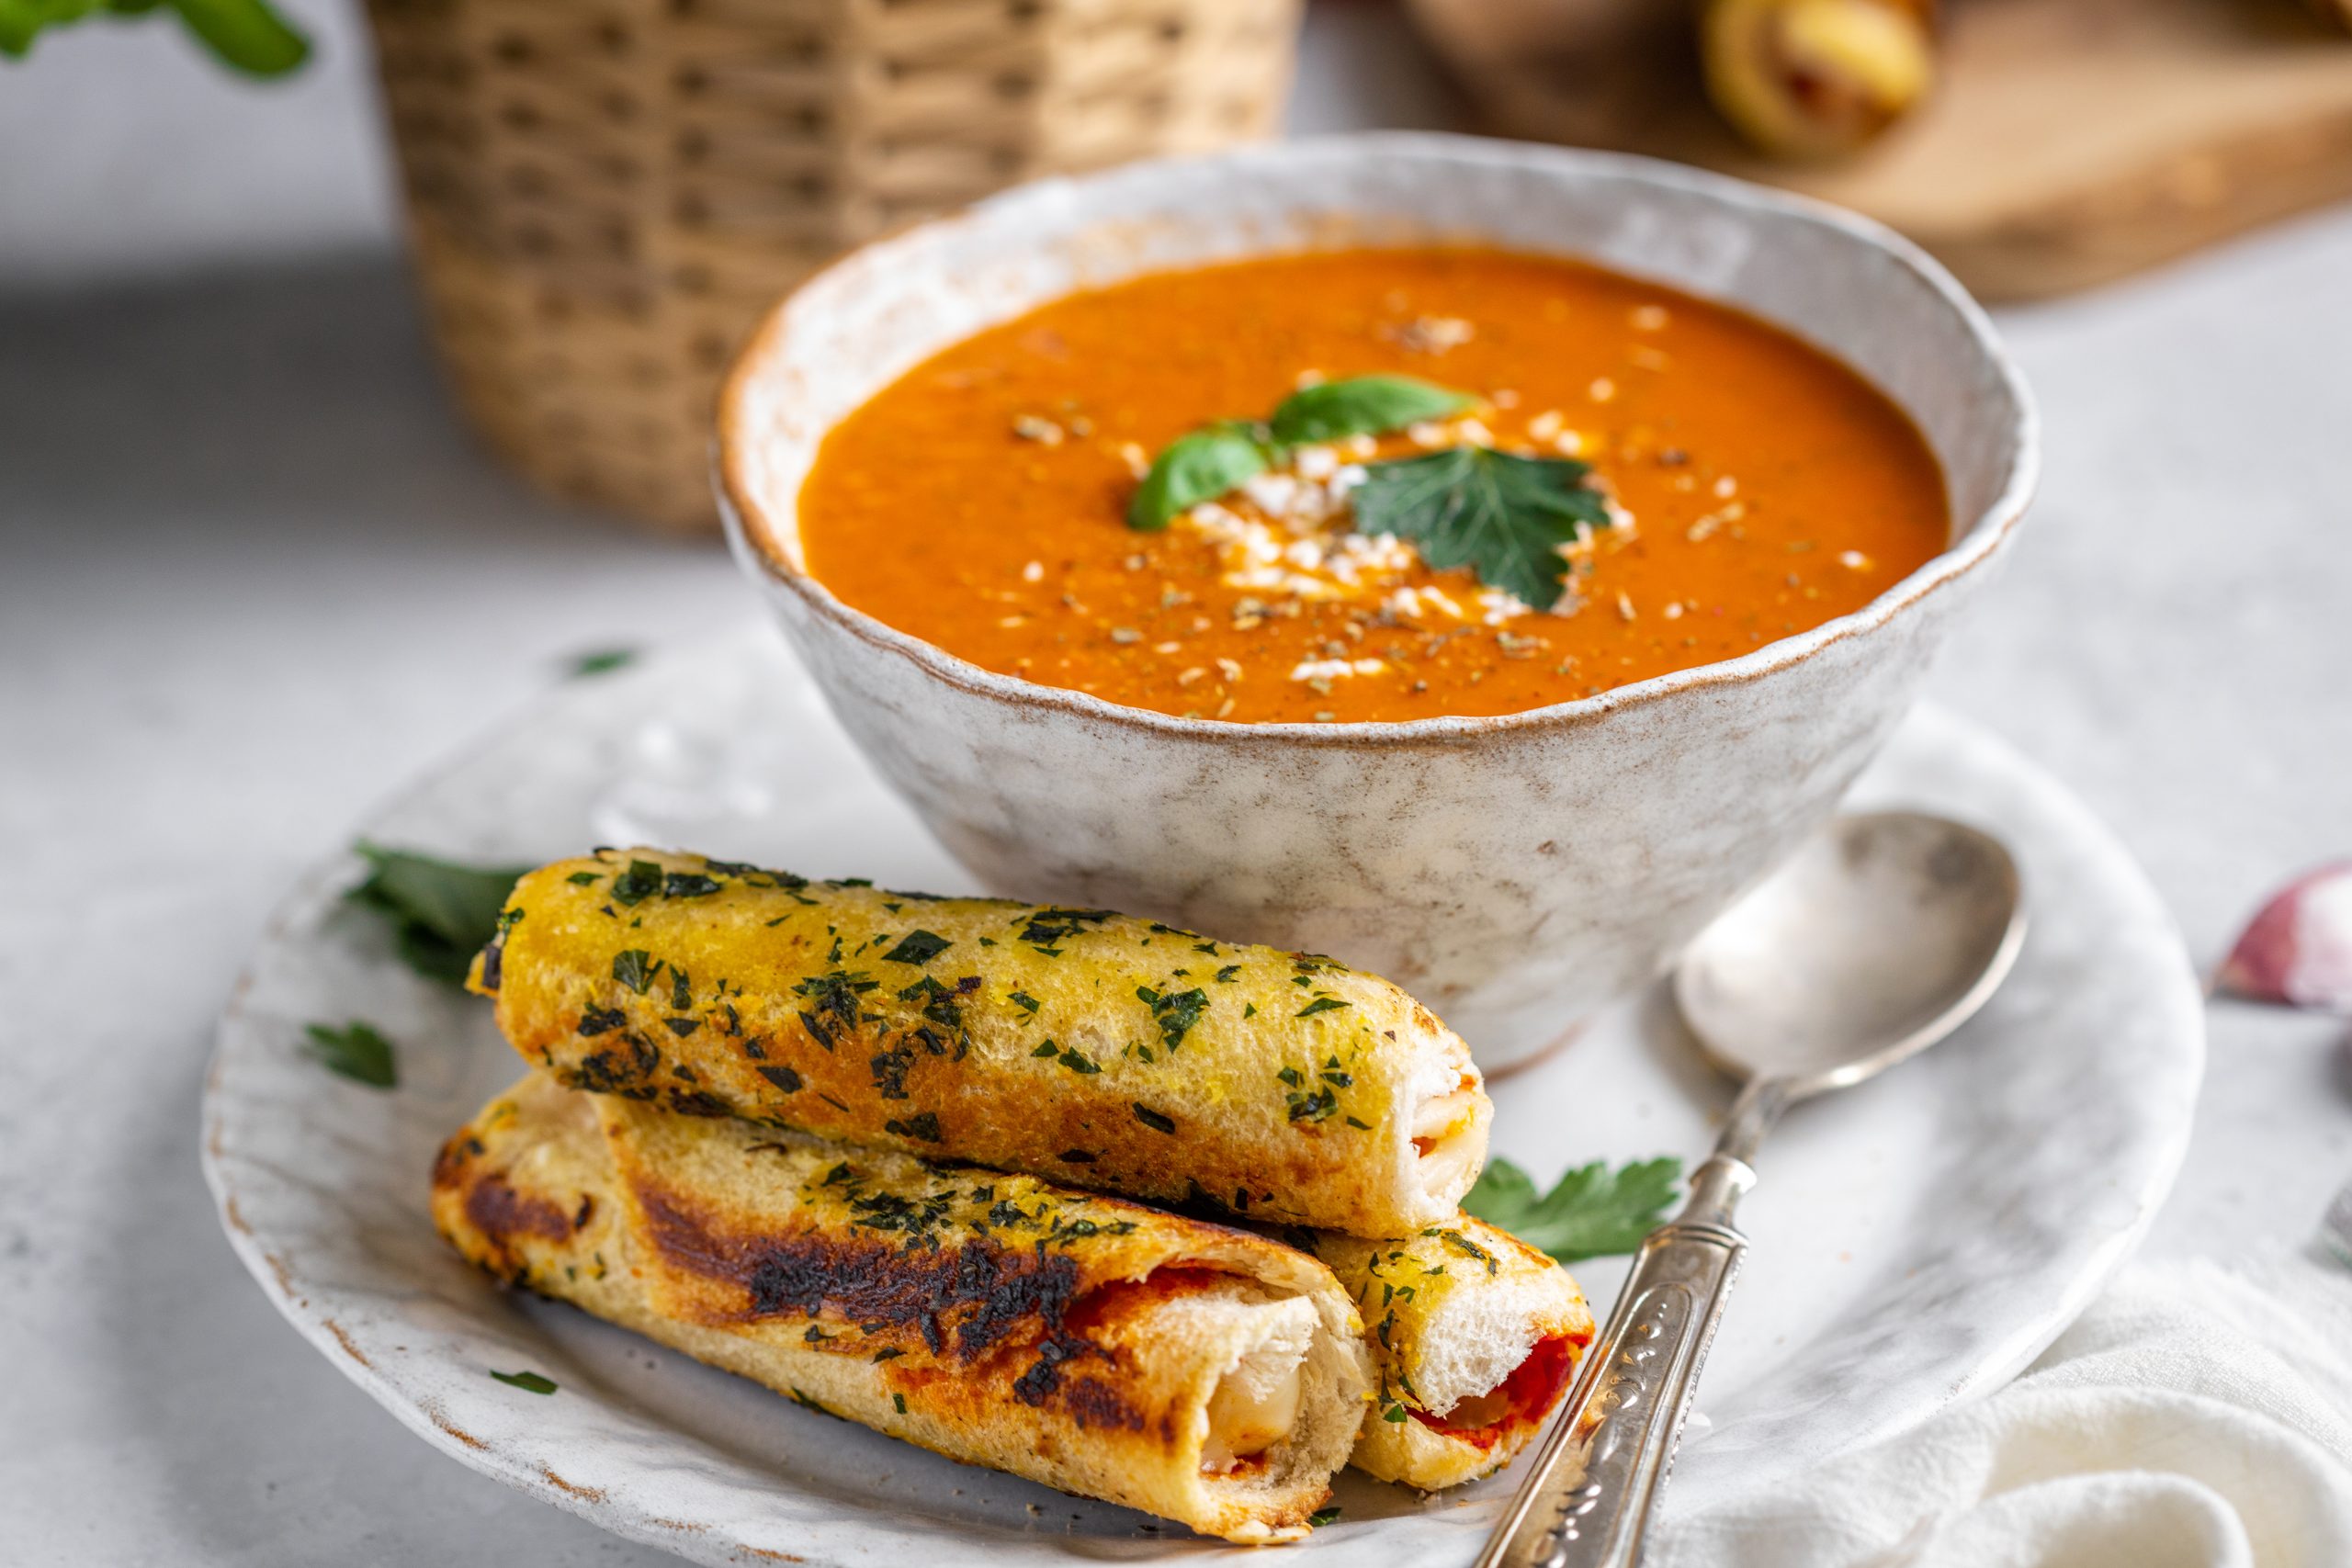 Garlic Bread Roll Ups with Tomato Soup